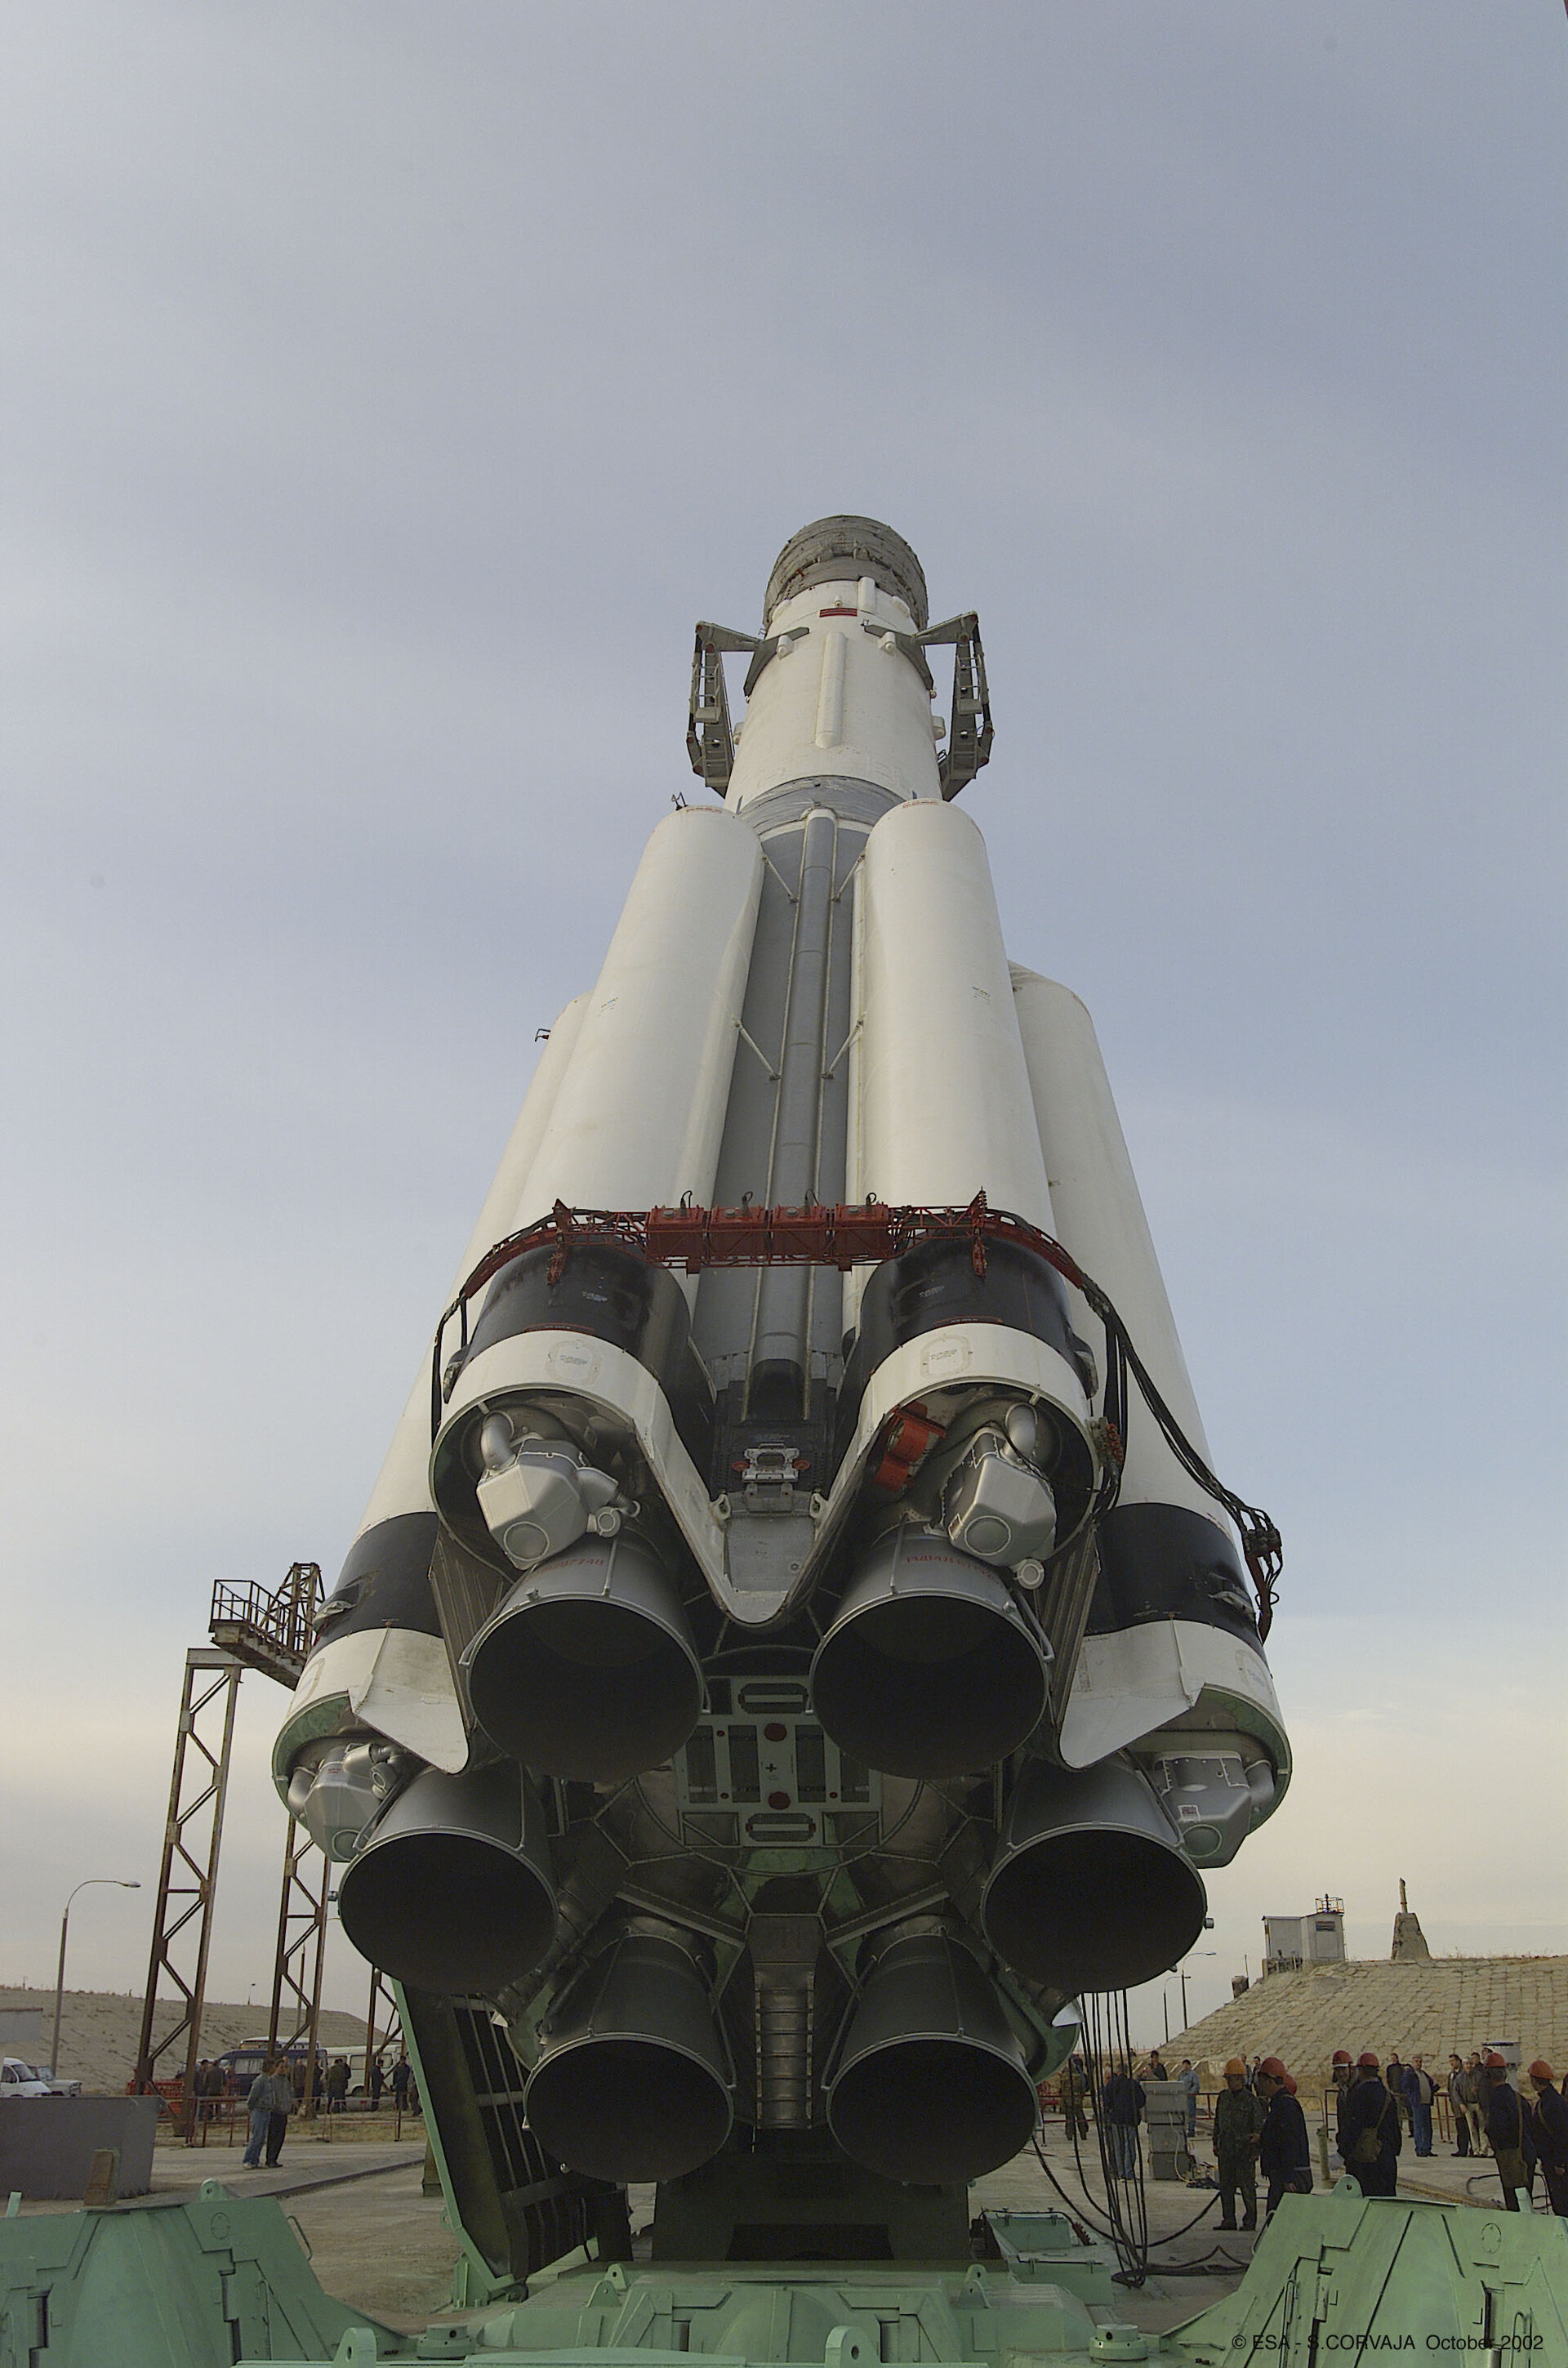 Proton being moving into the vertical position